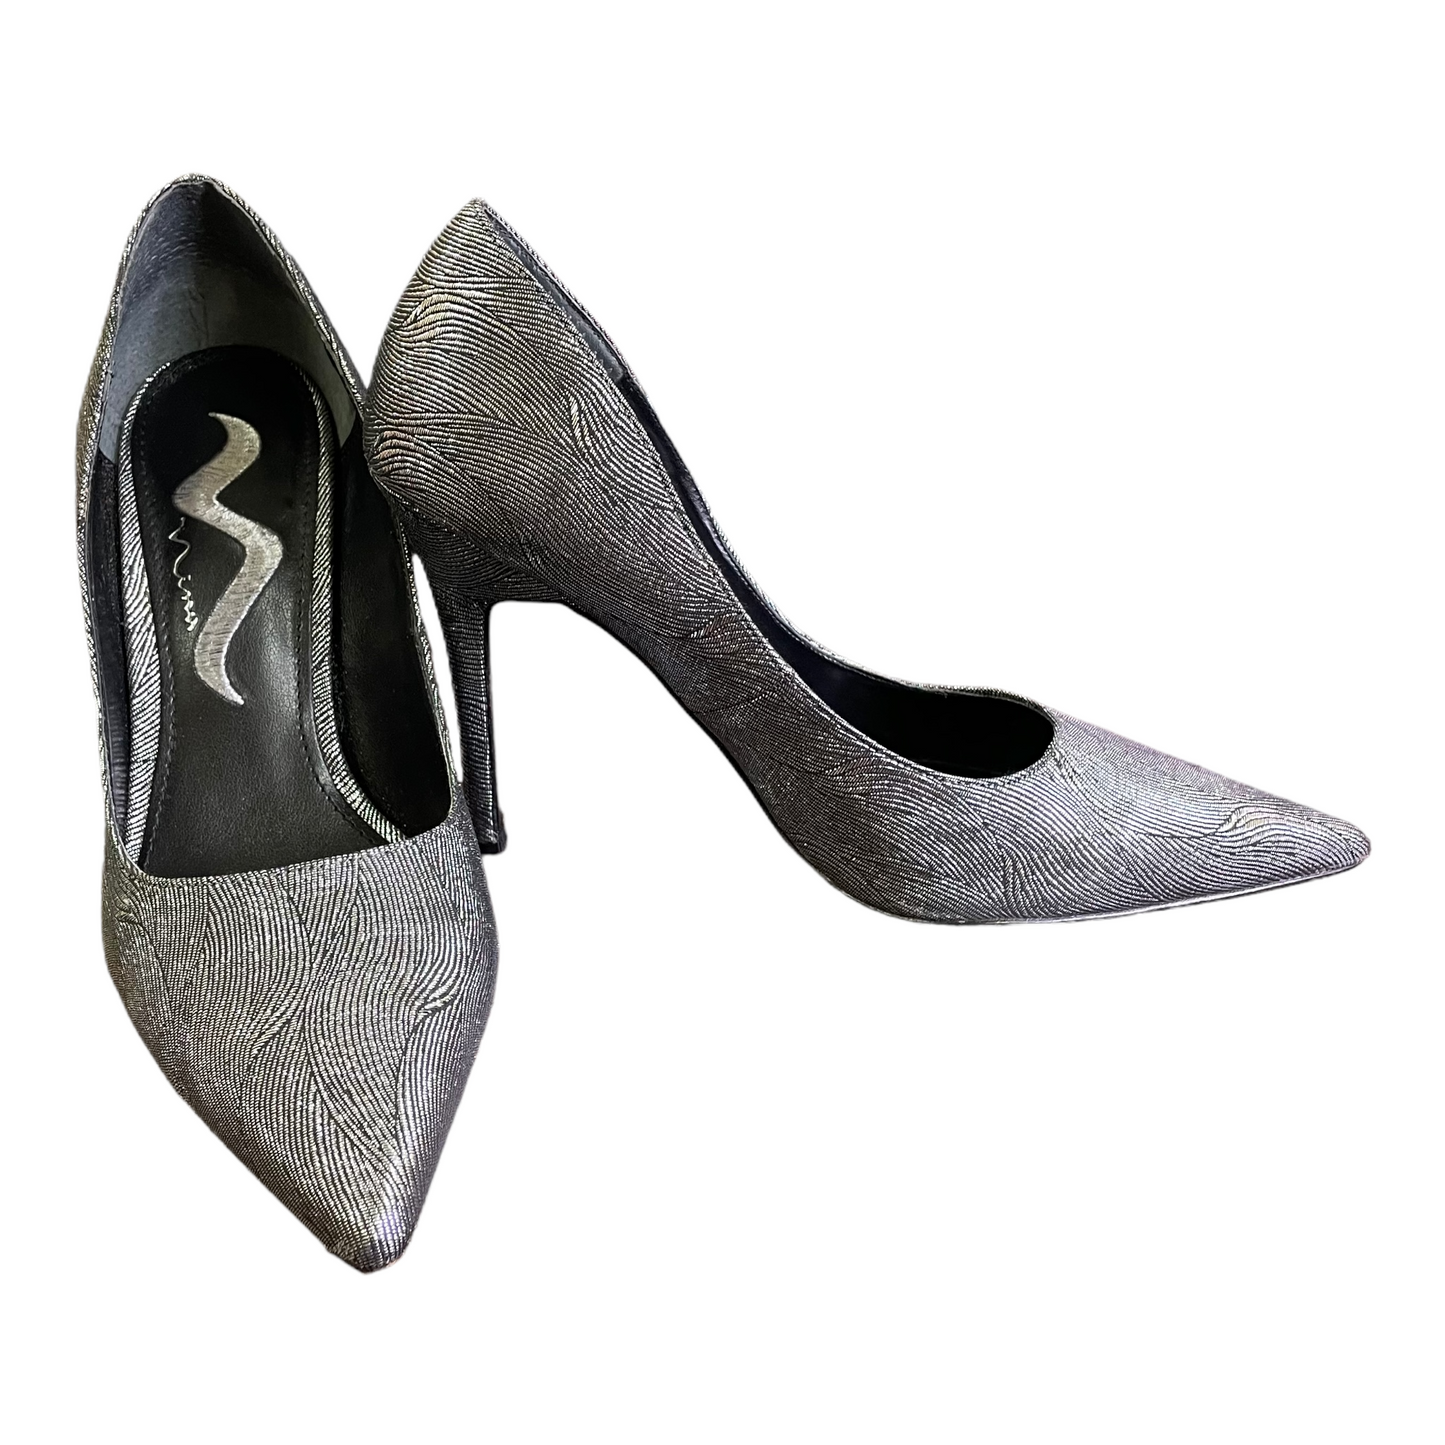 Shoes Heels Stiletto By Nina  Size: 6